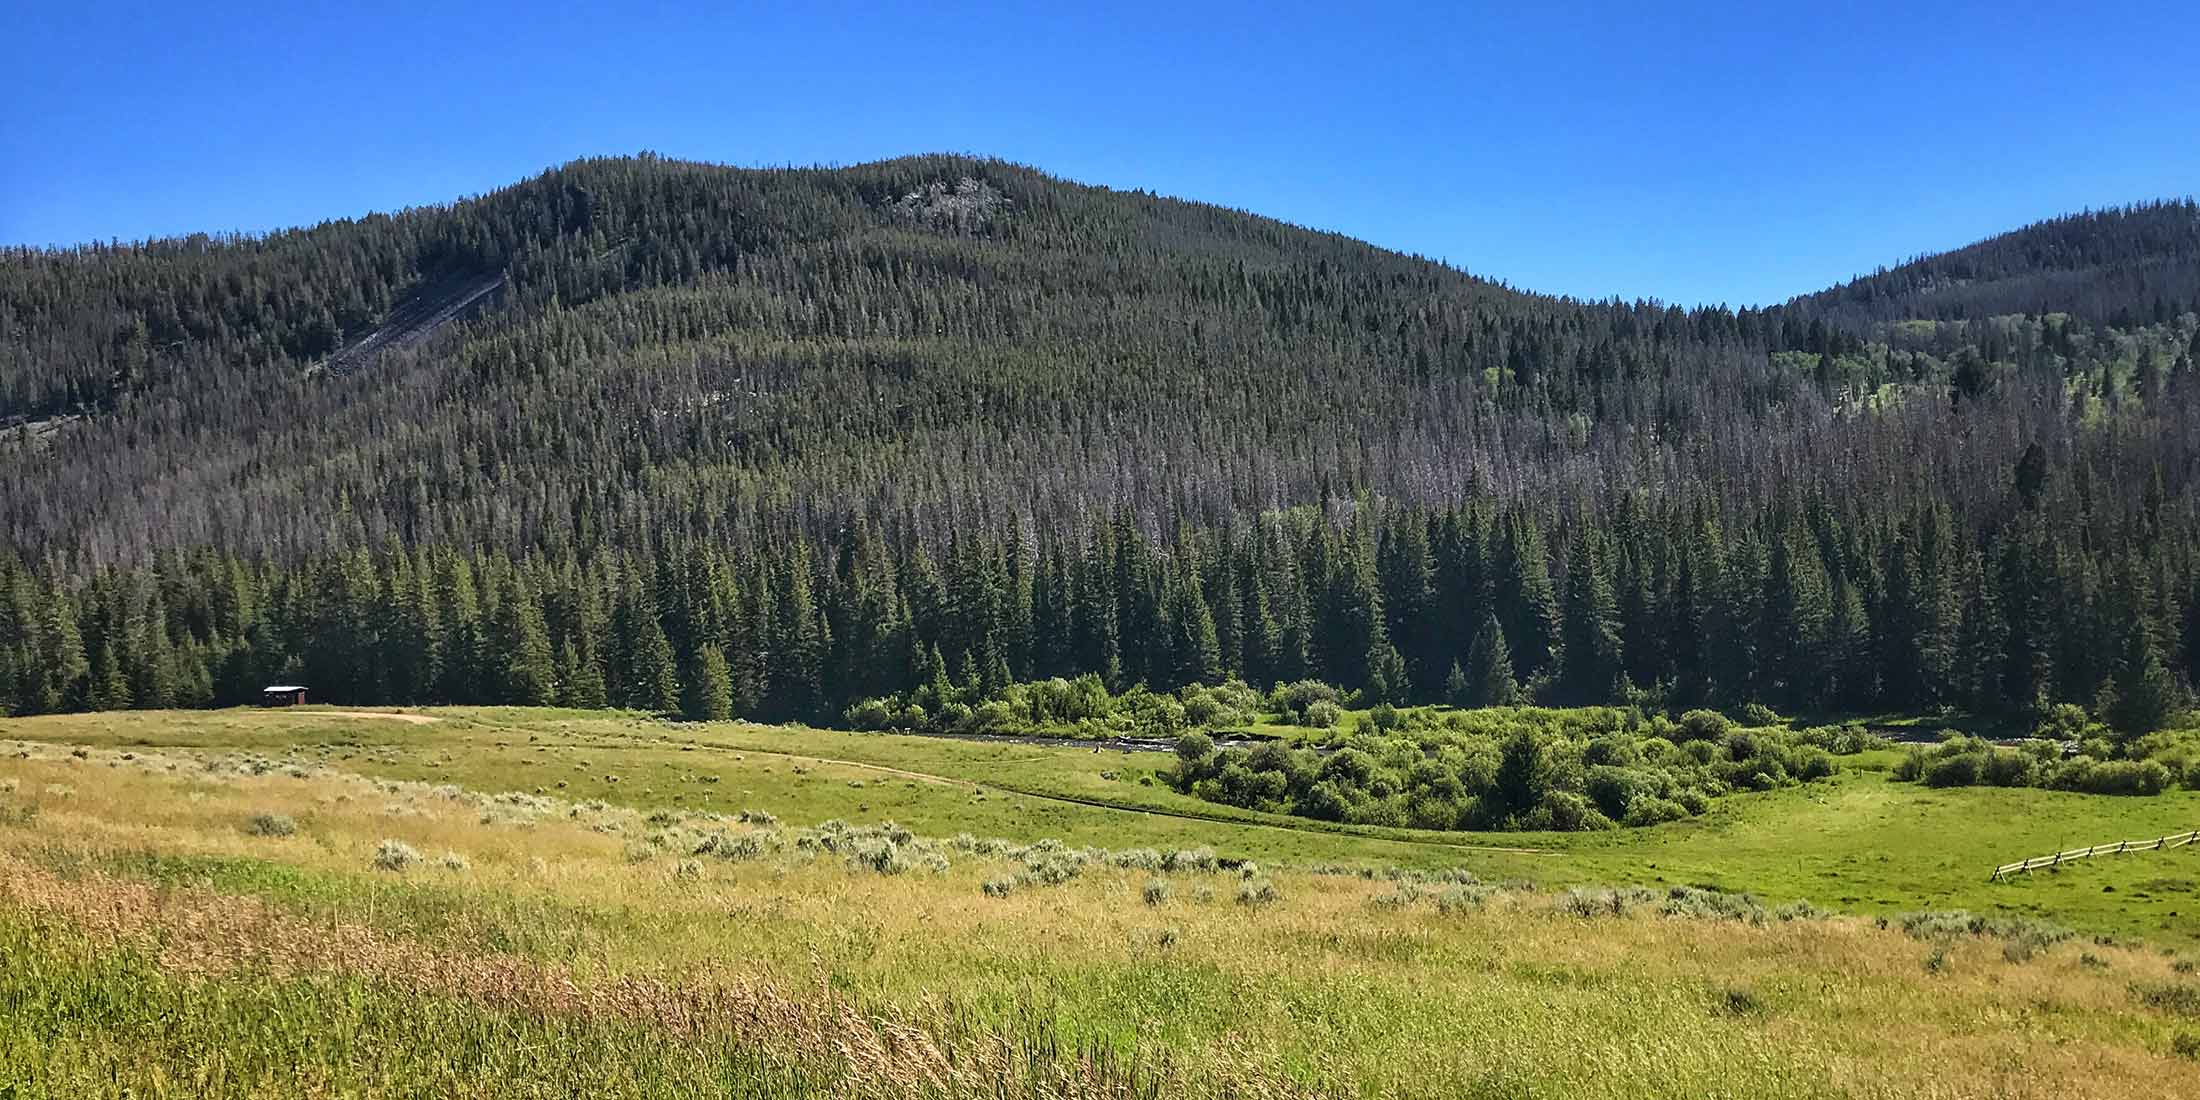 Find all information about Sheep Creek Fishing access located in the Little Belt Mountains, 30 miles from White Sulphur Springs, Montana. 